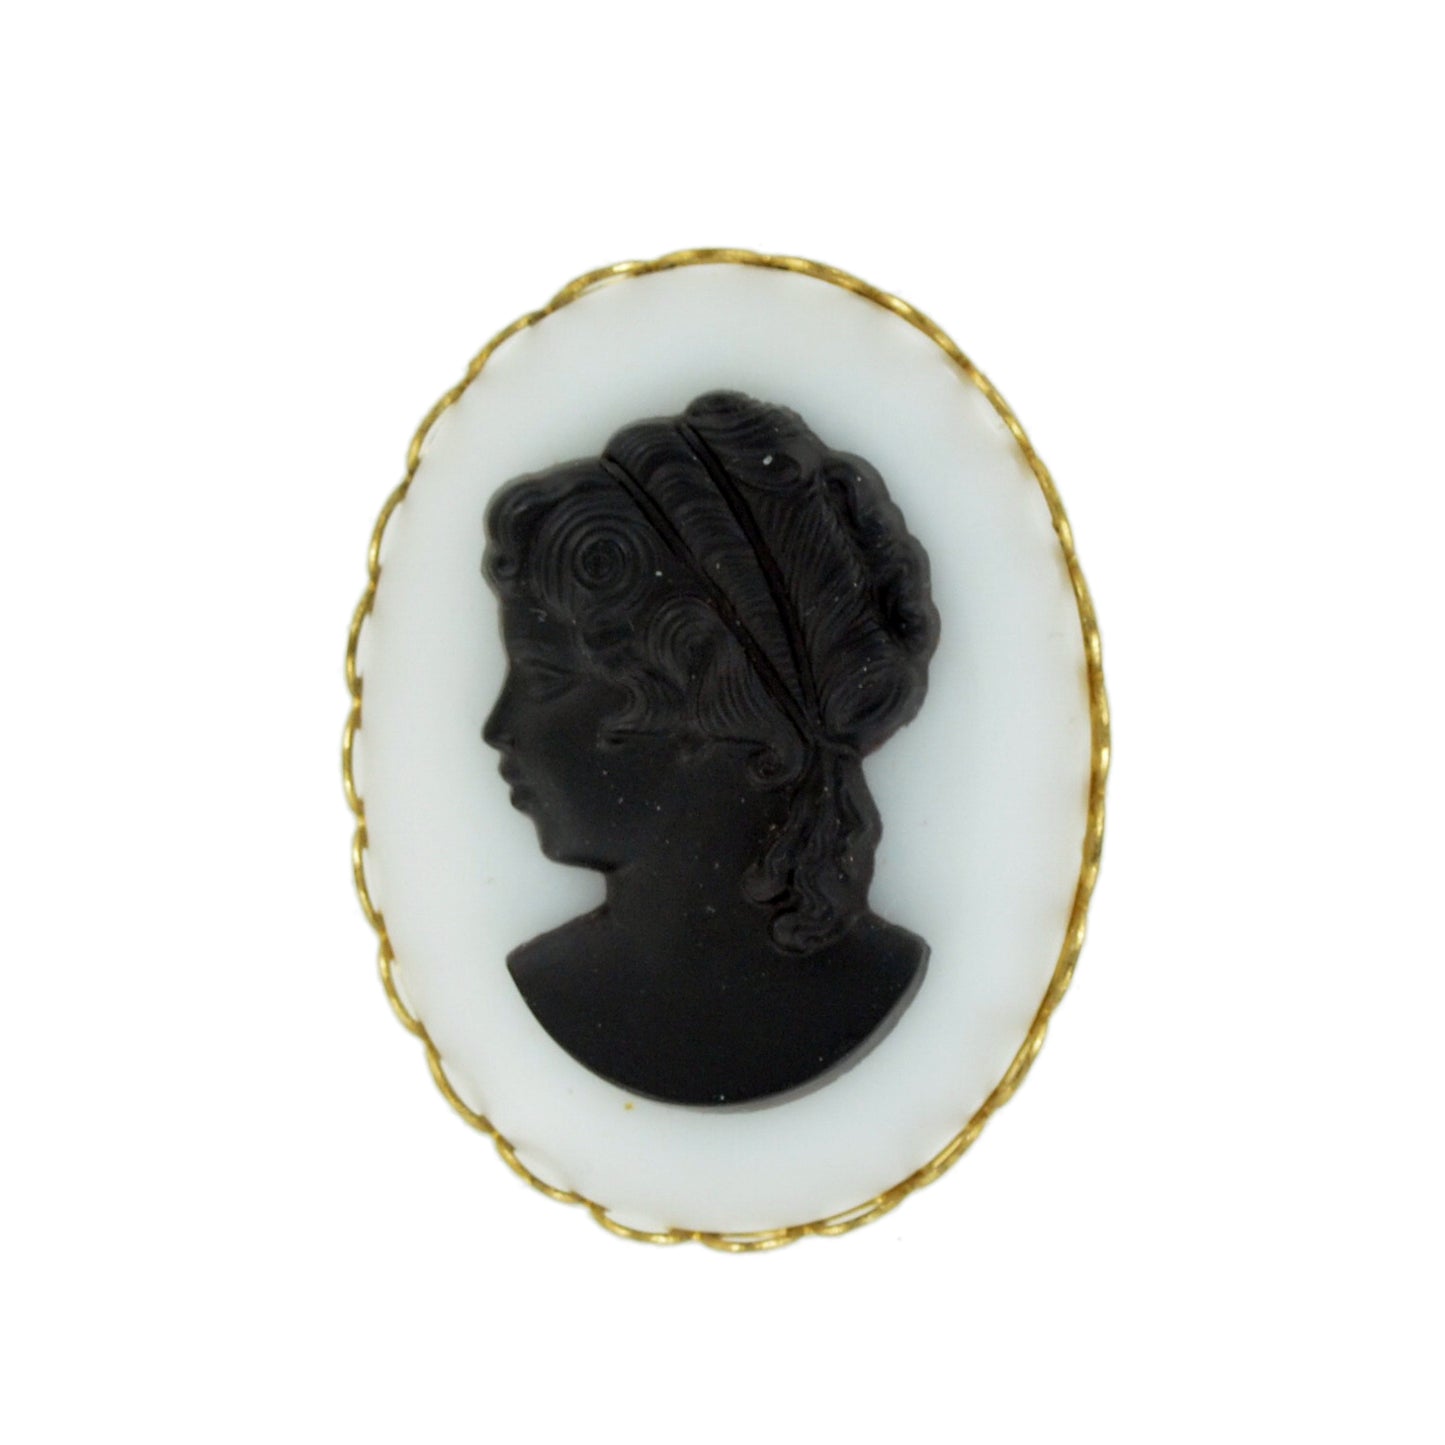 New Upcycled Female Cameo Brooch Pin Black White Glass Vintage Parts 1 1/2"